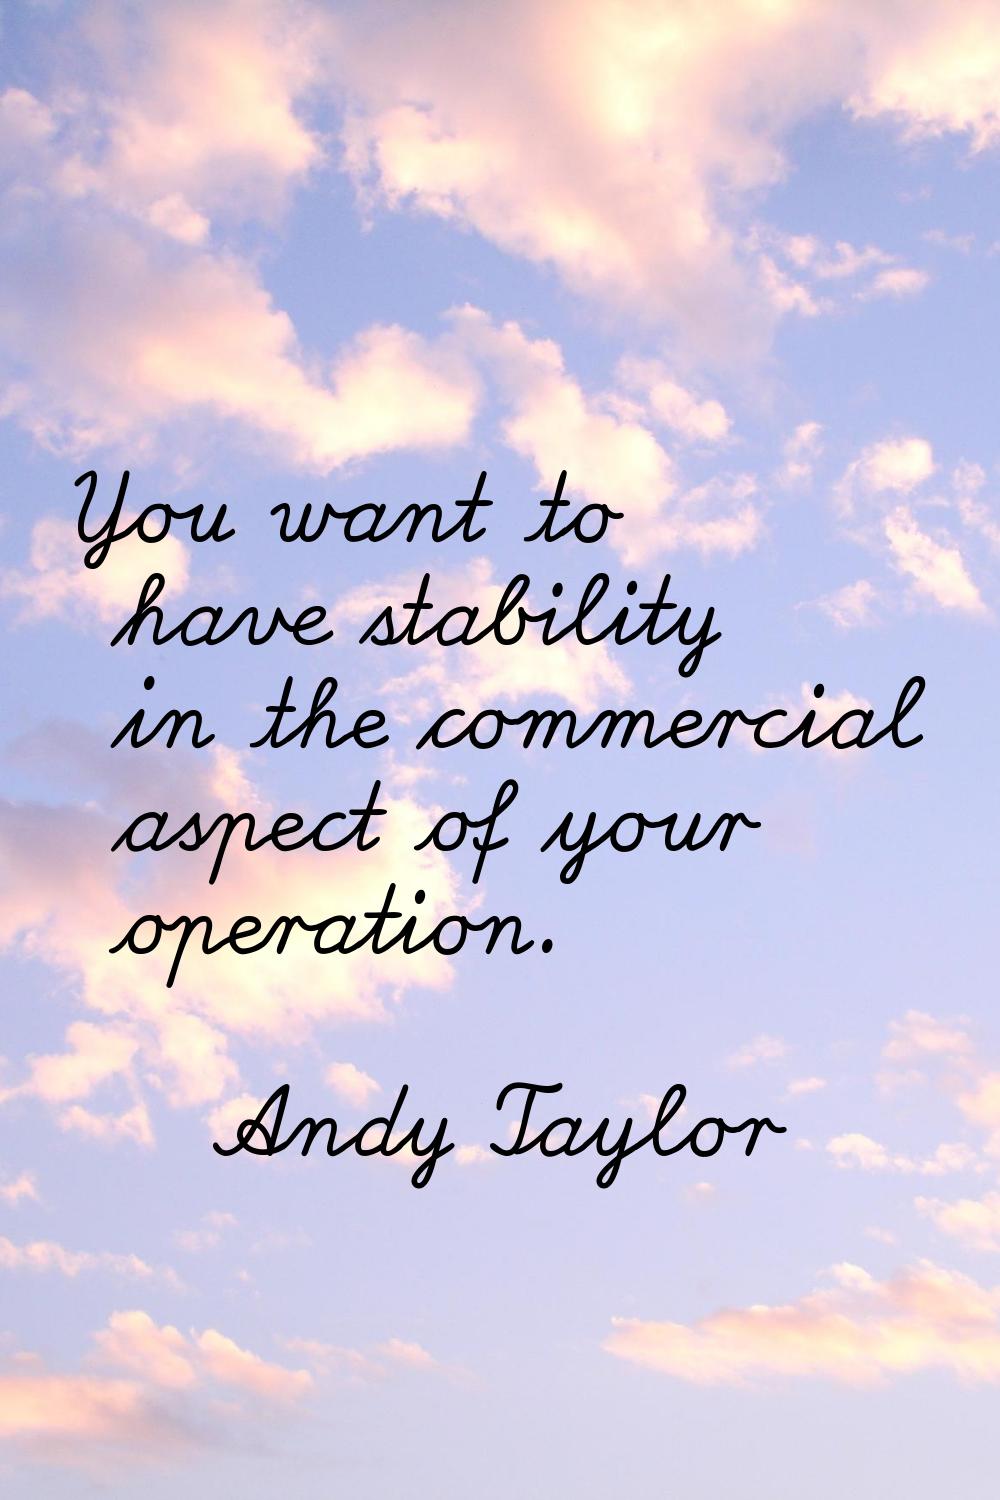 You want to have stability in the commercial aspect of your operation.